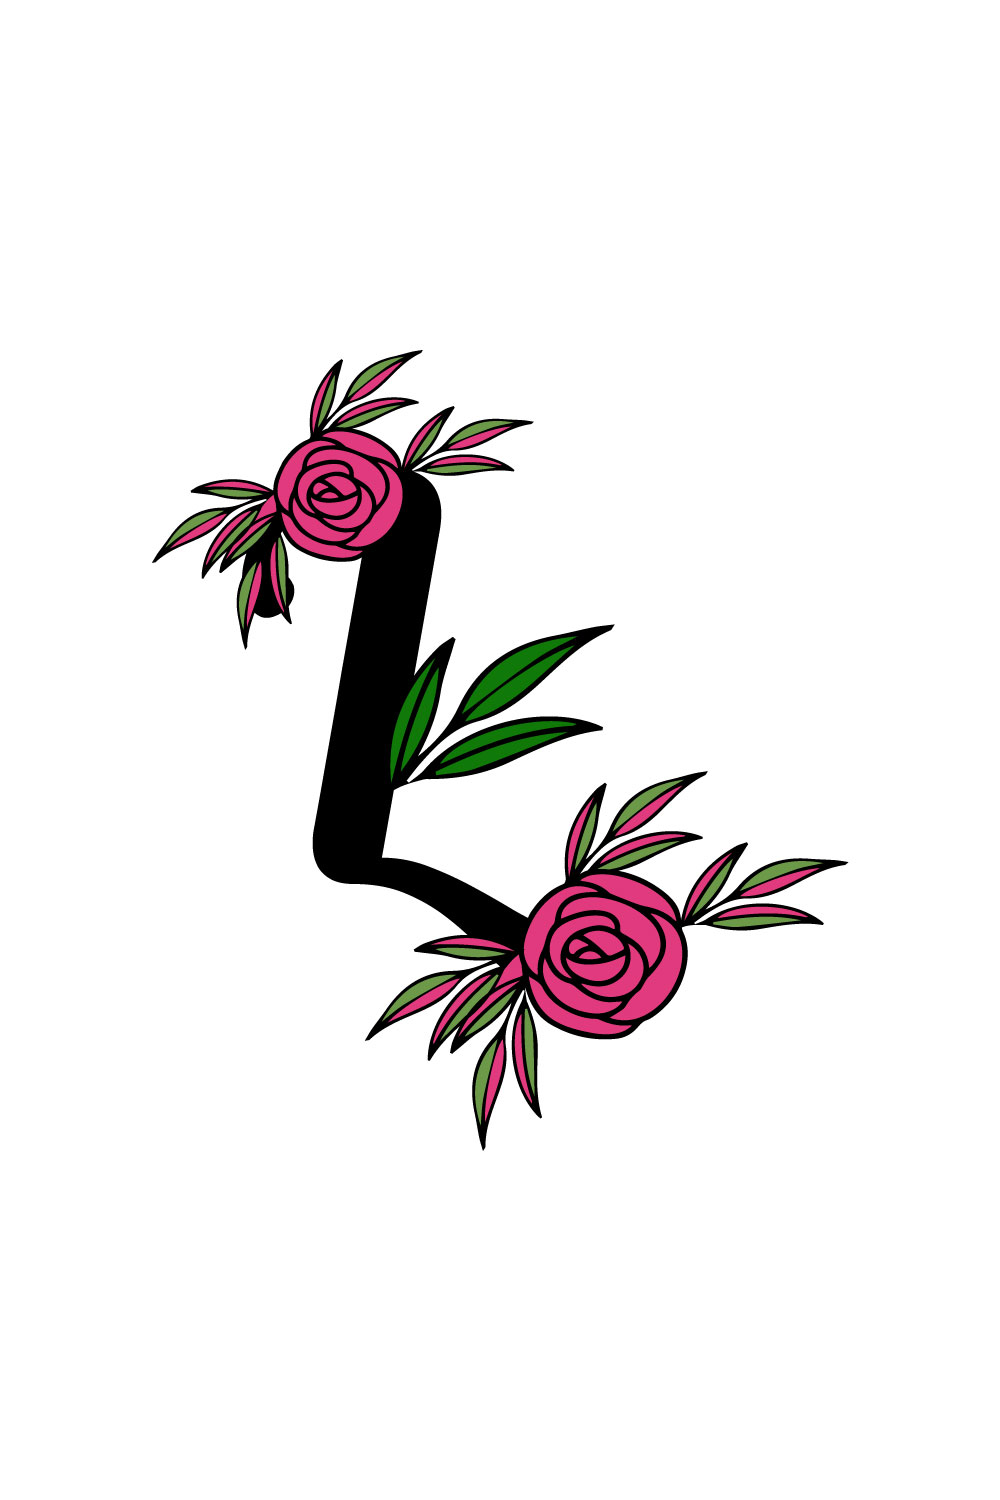 Free L wildflower rose logo pinterest preview image.